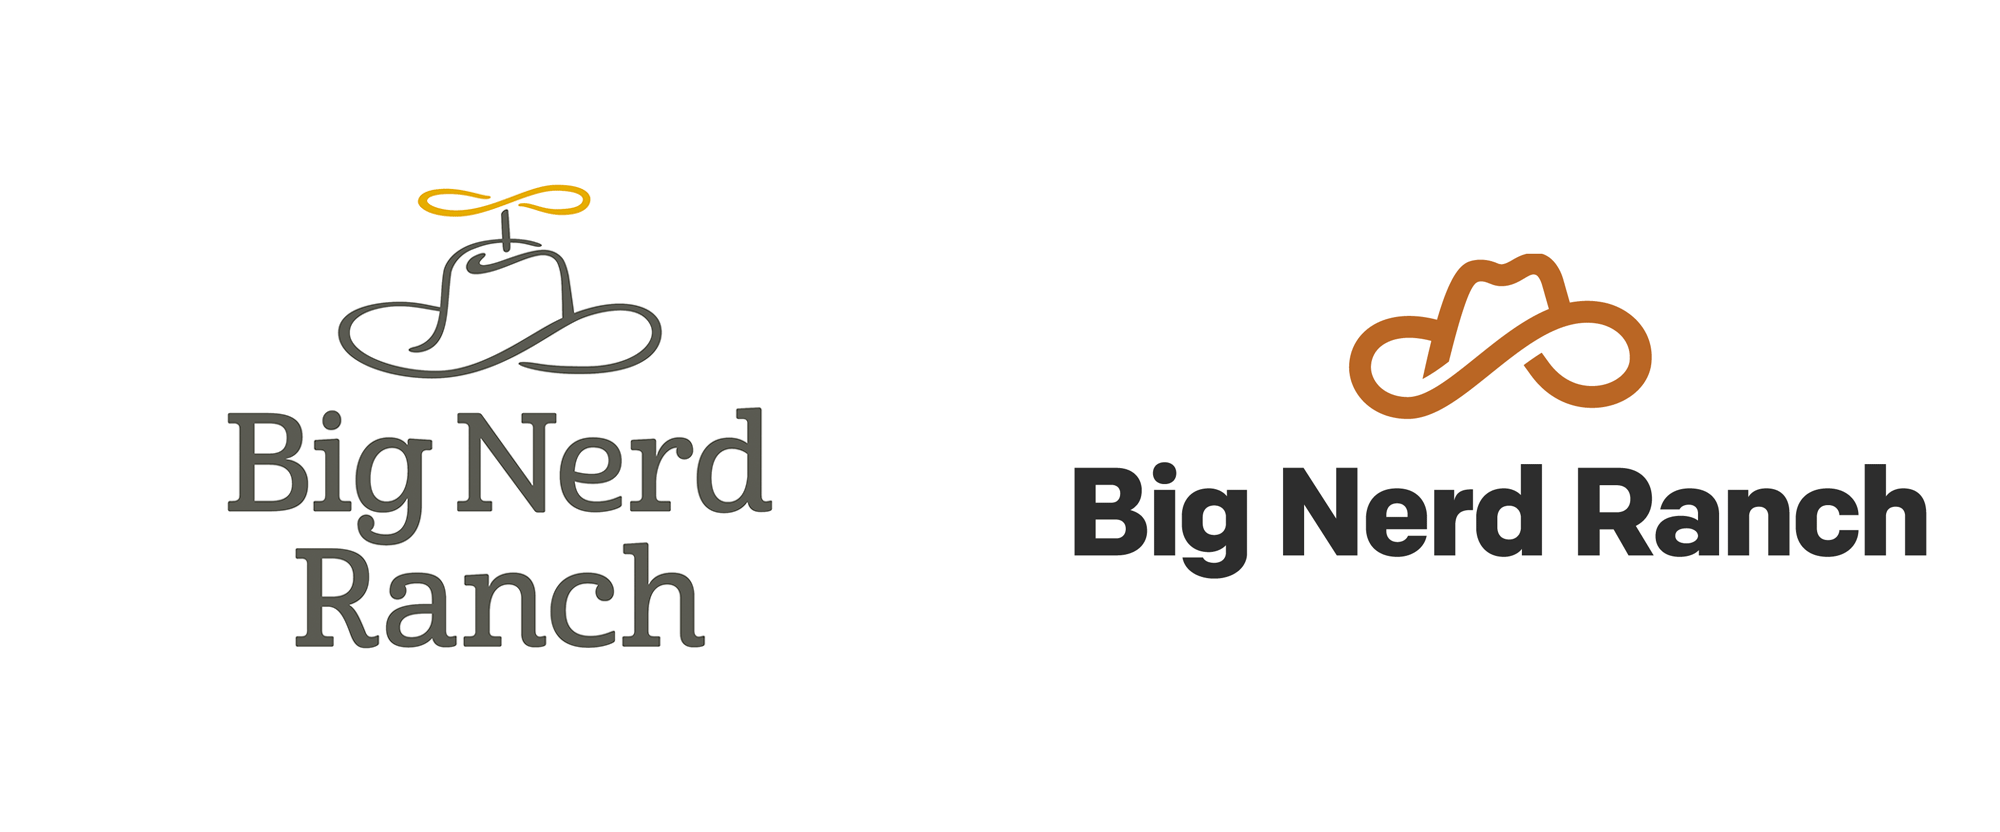 Clip Logo - Brand New: New Logo and Identity for Big Nerd Ranch